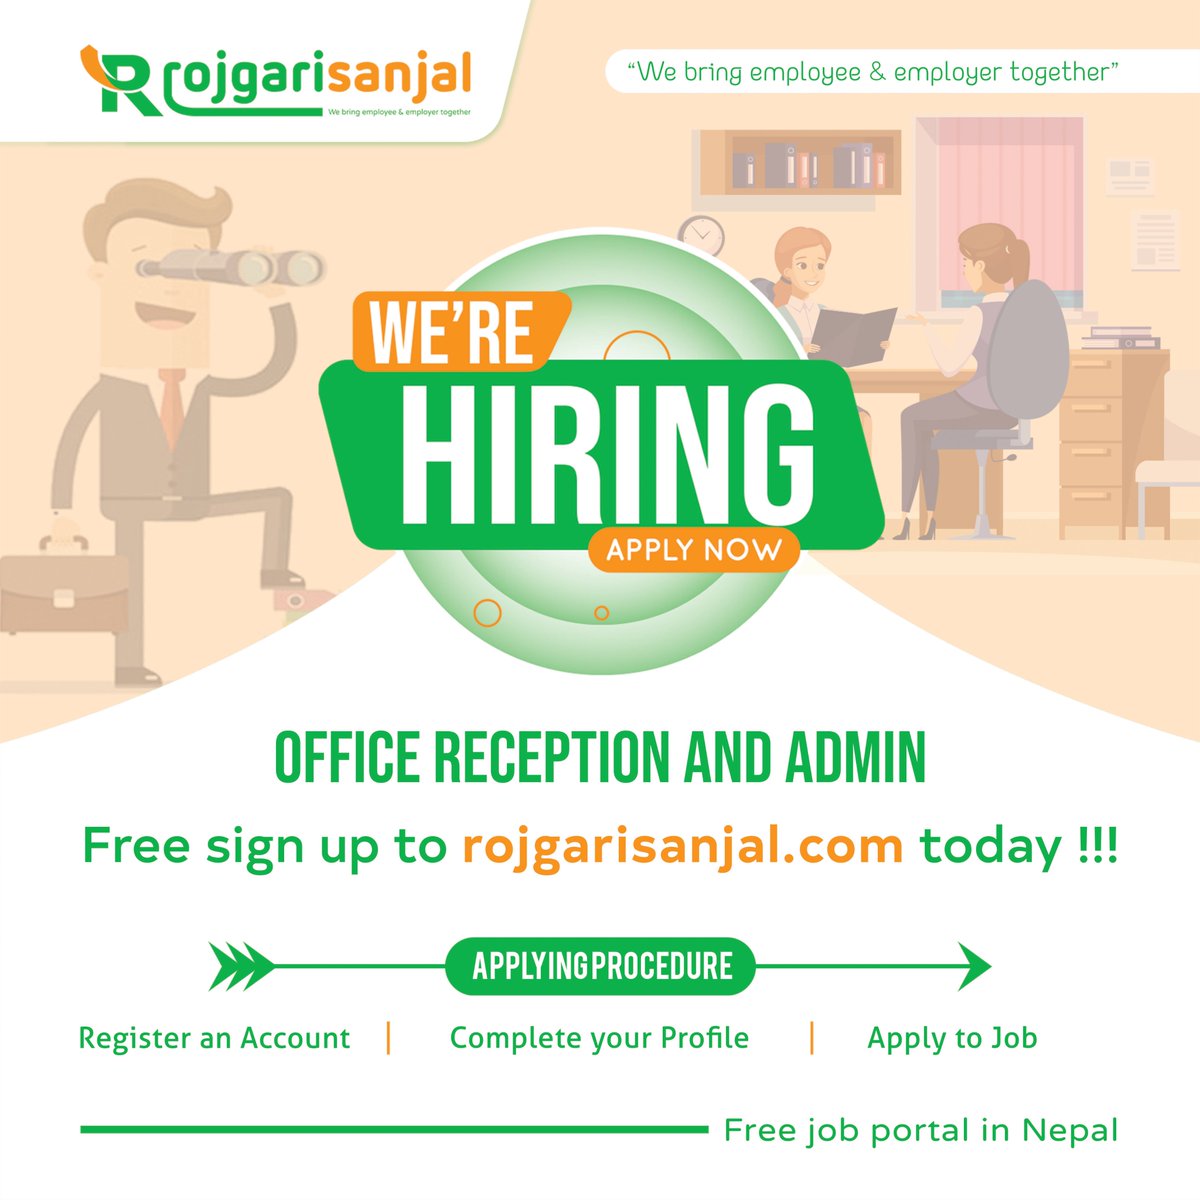 Join our team! We're hiring an office receptionist and admin in Kupondole Lalitpur. Full-time, mid-level role with negotiable salary. No experience required but higher secondary education preferred. Apply by May 10, 2023. #hiring #adminjob #receptionist #Nepaljobs #jobopening